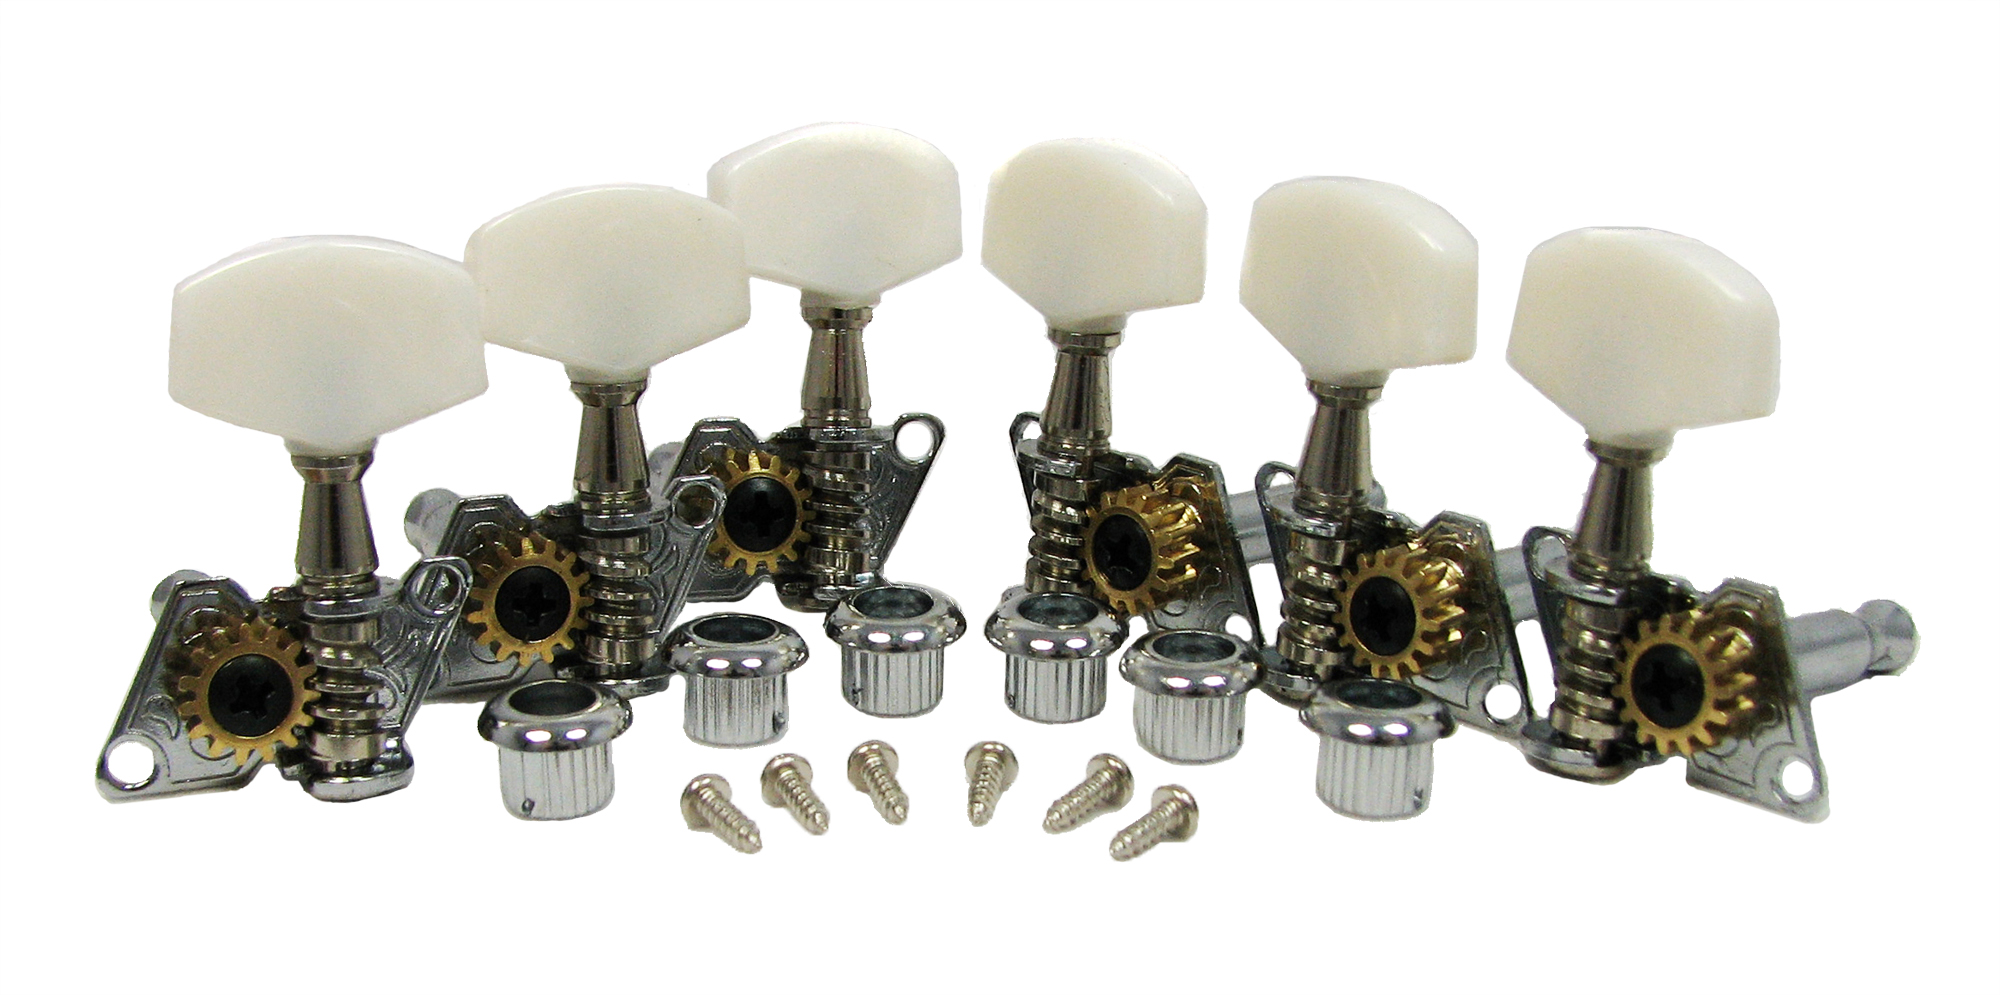 Chrome Open-Gear Economy Tuners/Machine Heads - 6pc. 3 left/3right